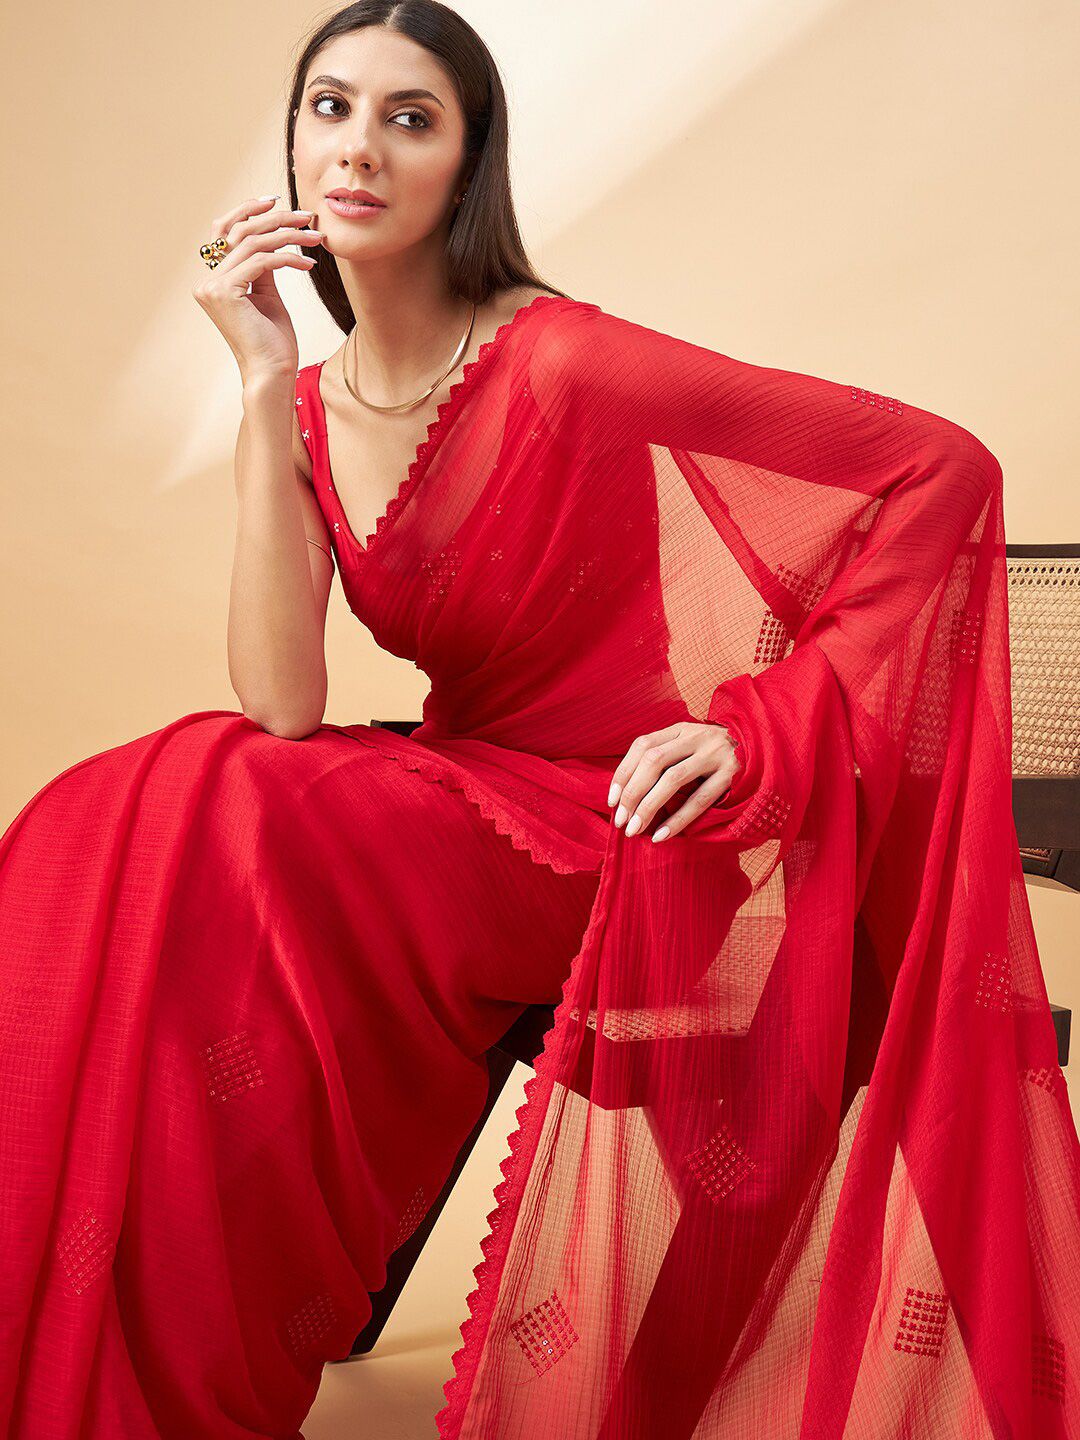 all about you Red Geometric Embroidered Pure Chiffon Saree Price in India